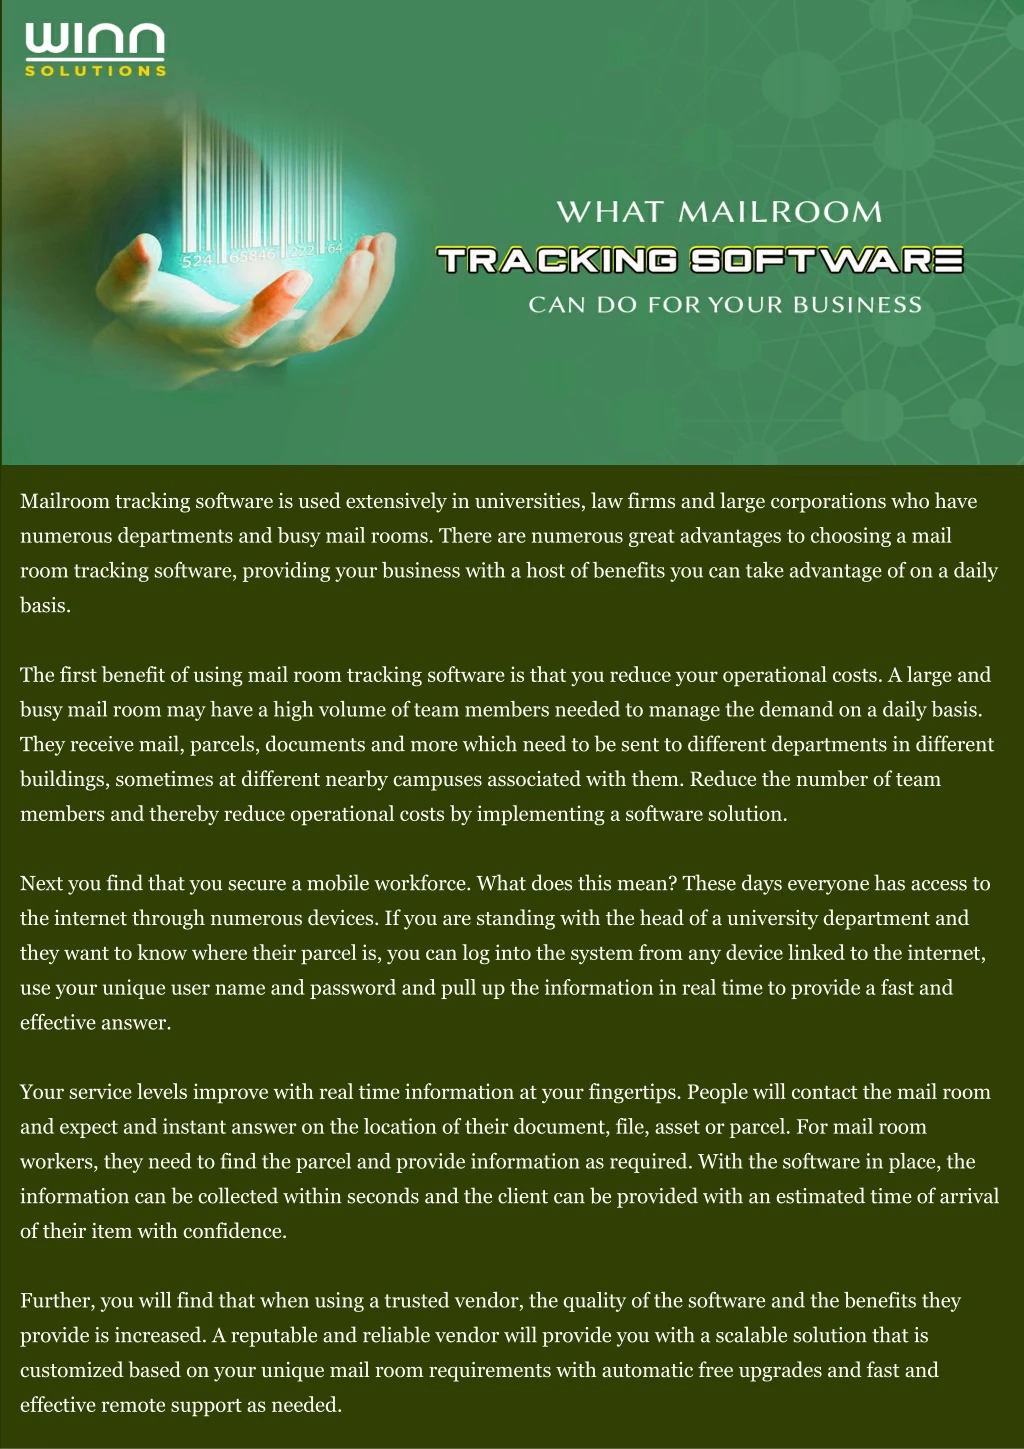 mailroom tracking software is used extensively